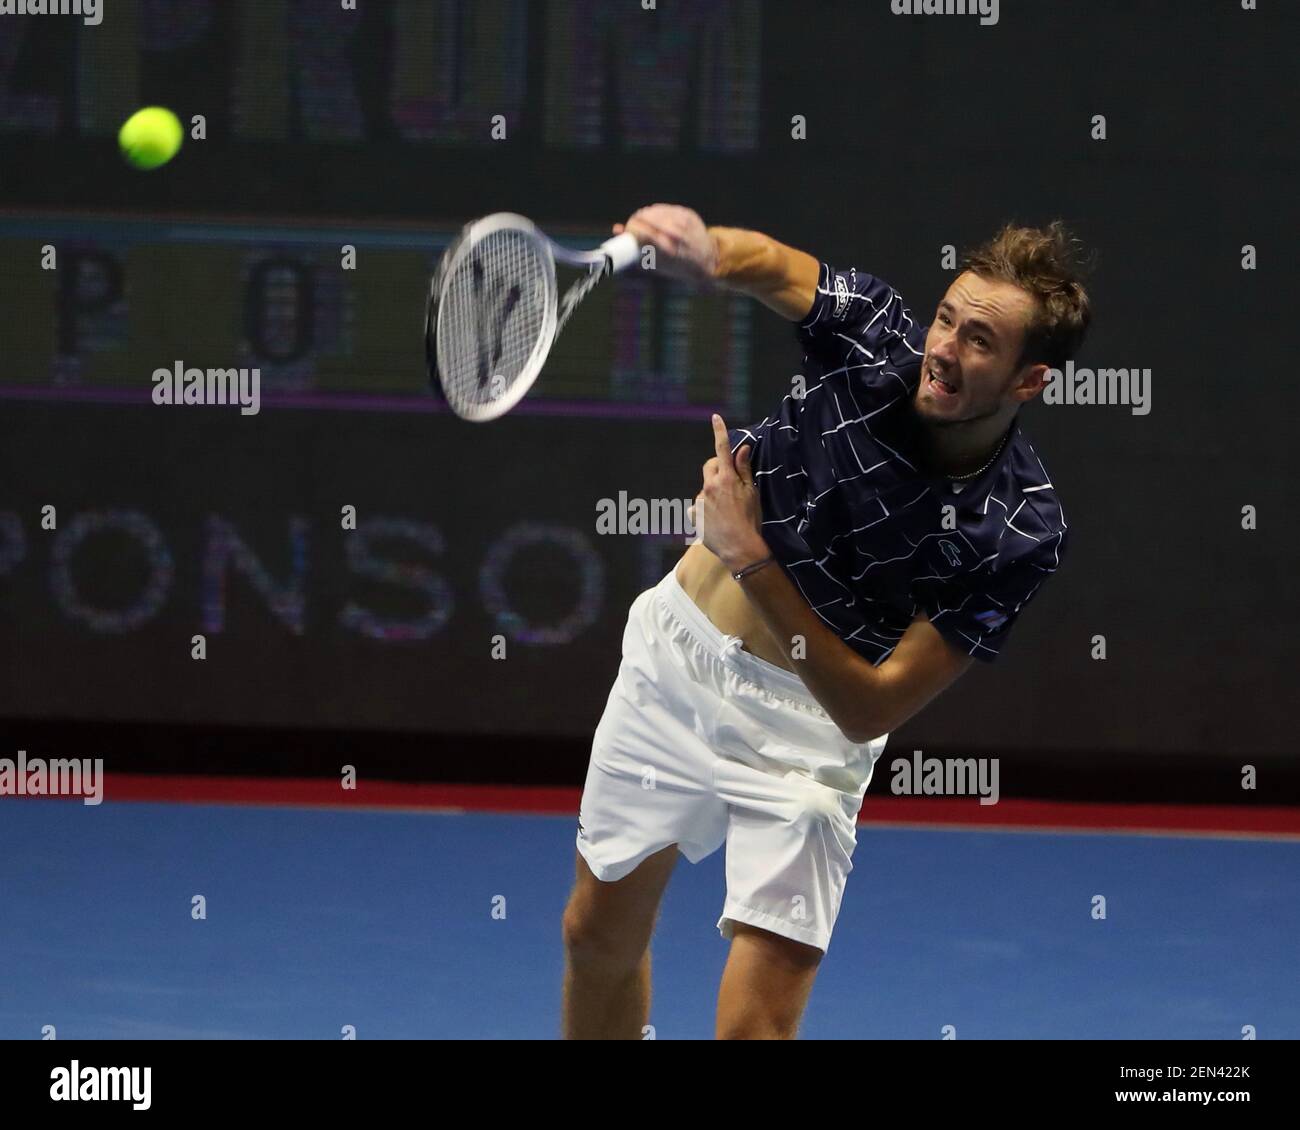 Daniil Medvedev of Russia in action against Reilly Opelka of the United States during the St. Petersburg OPEN 2020 tennis tournament at Sibur Arena.(Final score; Daniil Medvedev Reilly Opelka 2: 1). Stock Photo